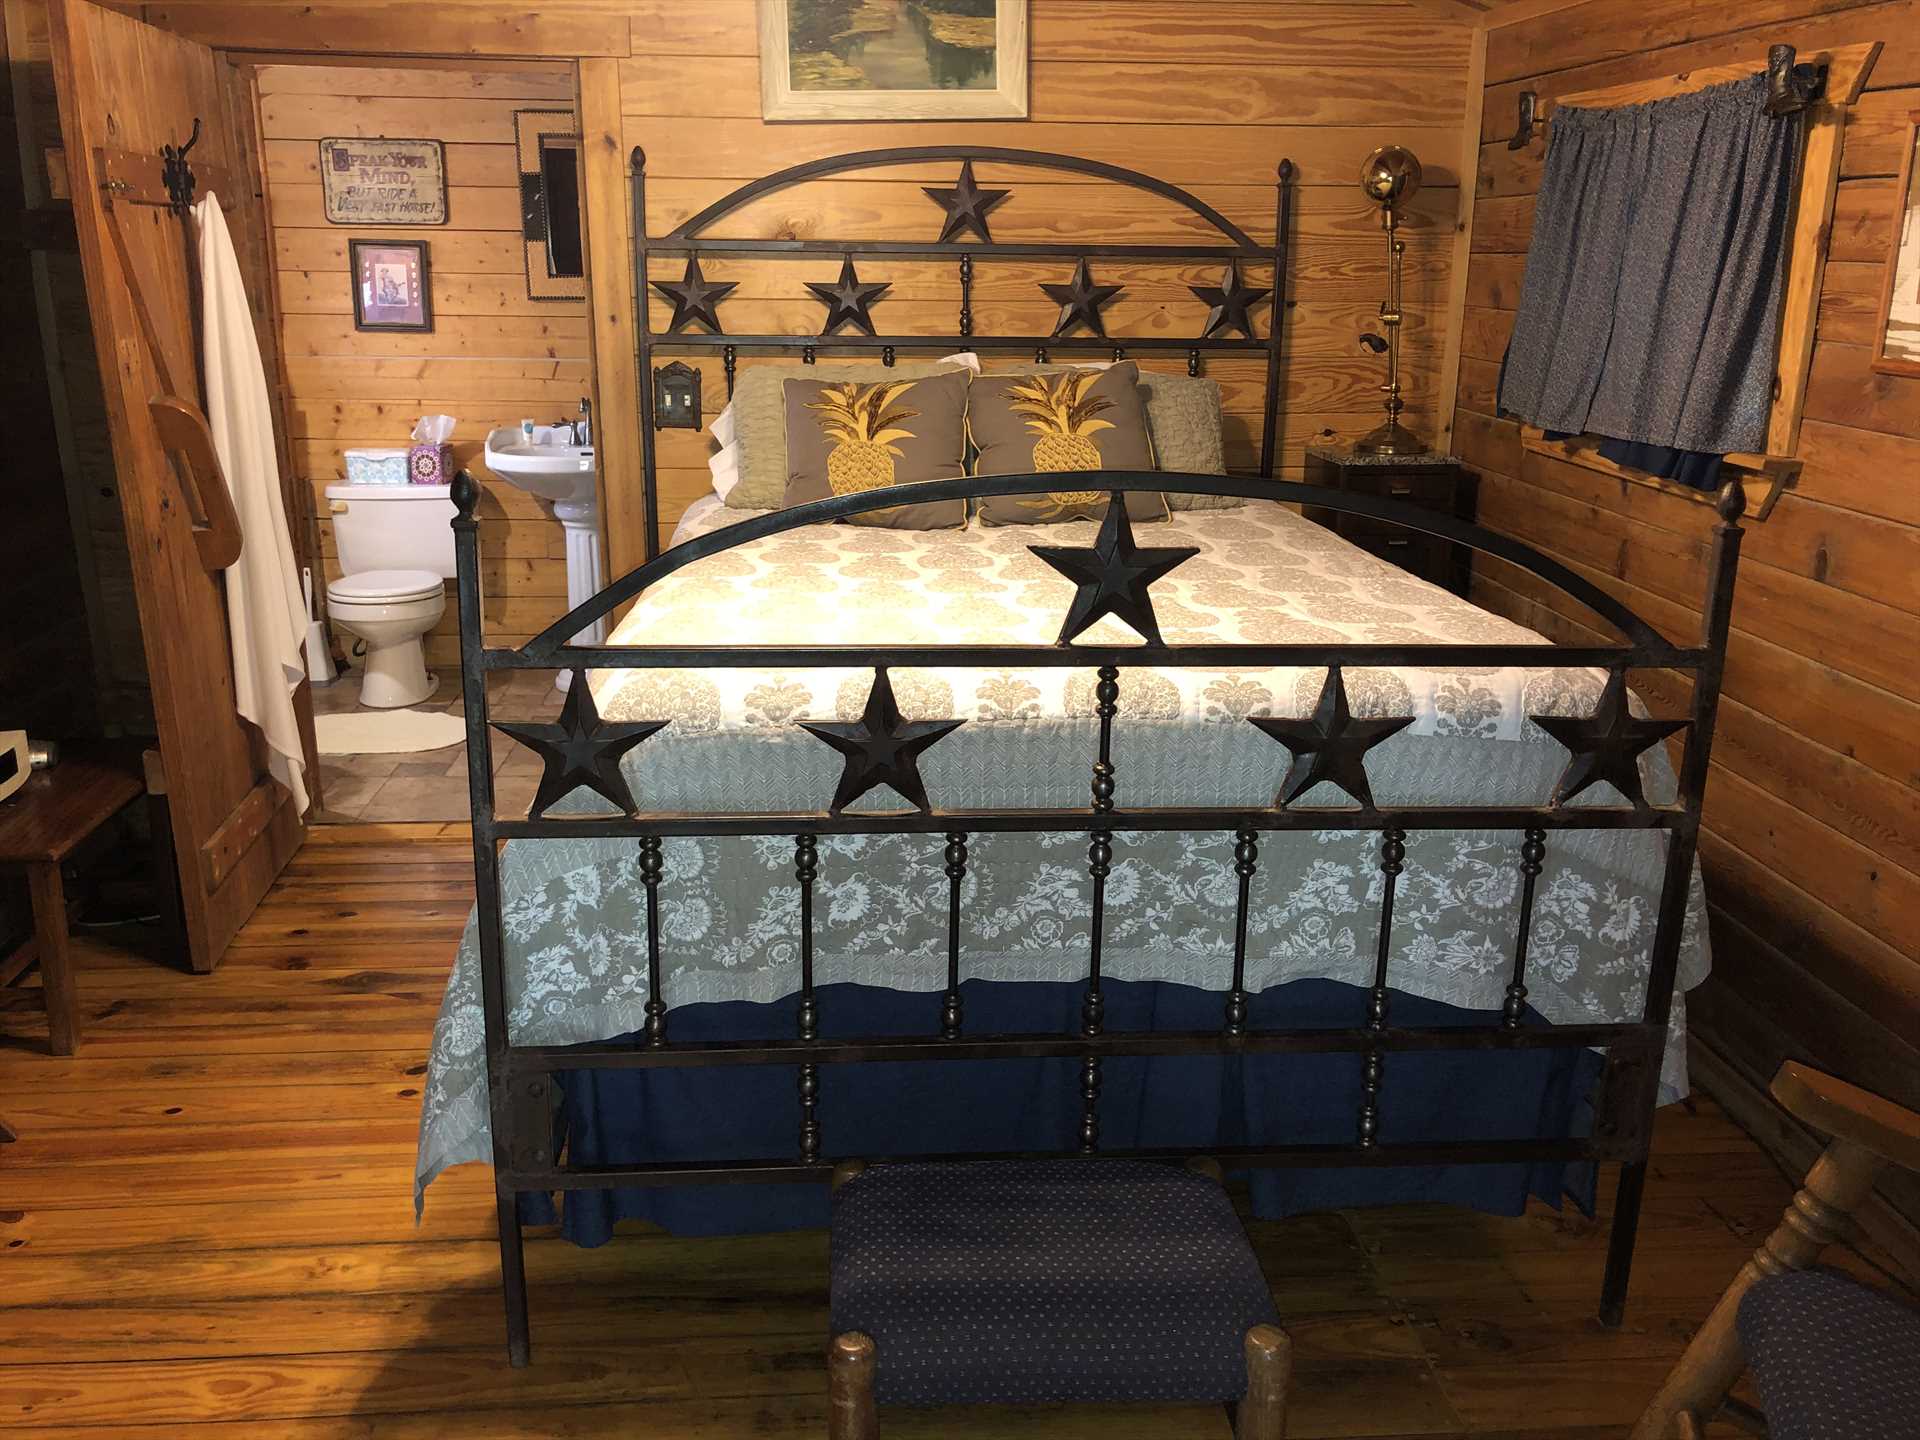                                                 Check out the uniquely-Texan Lone Star frame on the big and comfortable queen-sized bed!